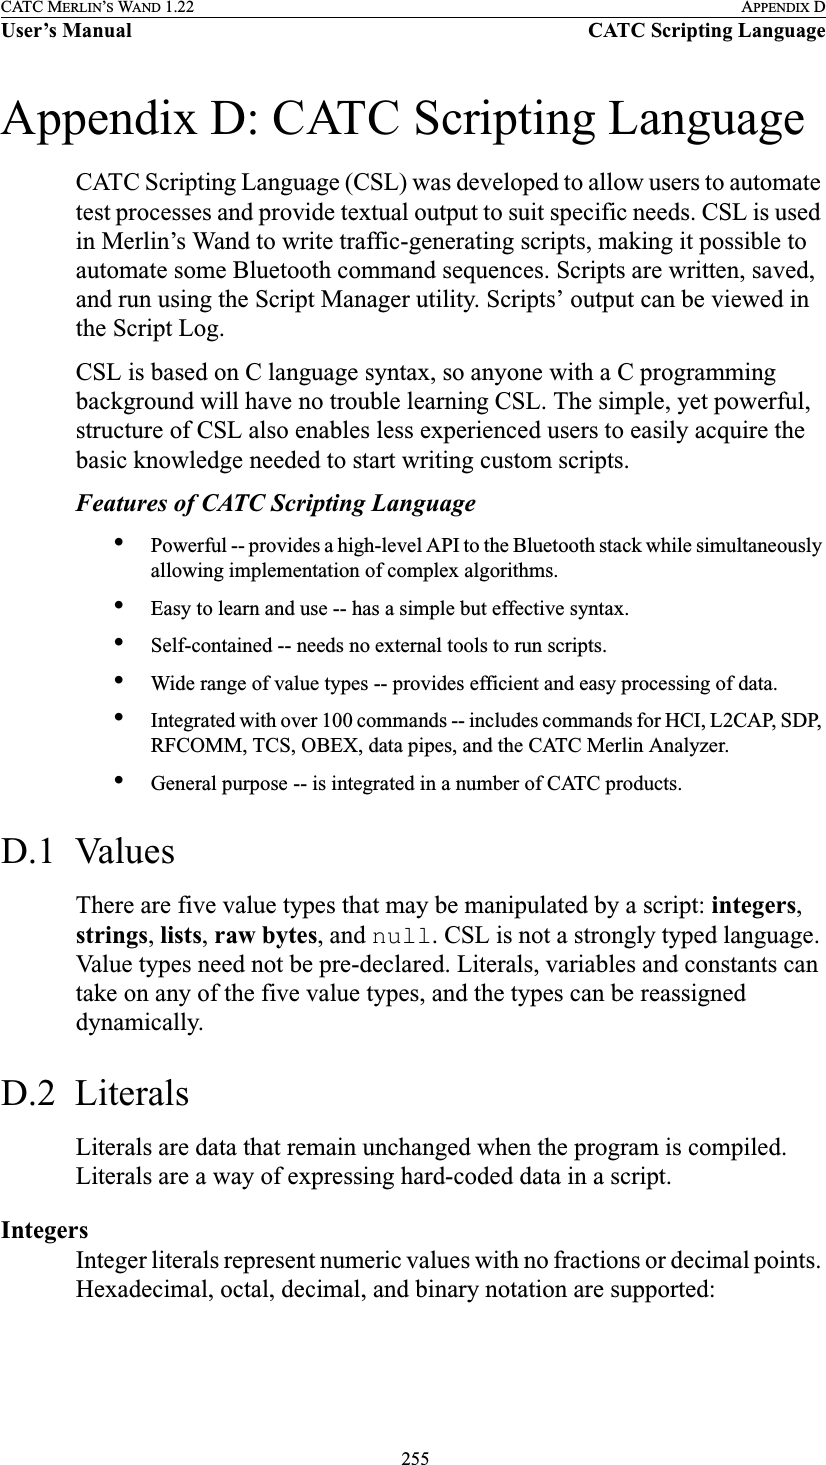  255CATC MERLIN’S WAND 1.22 APPENDIX DUser’s Manual CATC Scripting LanguageAppendix D: CATC Scripting LanguageCATC Scripting Language (CSL) was developed to allow users to automate test processes and provide textual output to suit specific needs. CSL is used in Merlin’s Wand to write traffic-generating scripts, making it possible to automate some Bluetooth command sequences. Scripts are written, saved, and run using the Script Manager utility. Scripts’ output can be viewed in the Script Log.CSL is based on C language syntax, so anyone with a C programming background will have no trouble learning CSL. The simple, yet powerful, structure of CSL also enables less experienced users to easily acquire the basic knowledge needed to start writing custom scripts.Features of CATC Scripting Language•Powerful -- provides a high-level API to the Bluetooth stack while simultaneously allowing implementation of complex algorithms.•Easy to learn and use -- has a simple but effective syntax.•Self-contained -- needs no external tools to run scripts.•Wide range of value types -- provides efficient and easy processing of data.•Integrated with over 100 commands -- includes commands for HCI, L2CAP, SDP, RFCOMM, TCS, OBEX, data pipes, and the CATC Merlin Analyzer.•General purpose -- is integrated in a number of CATC products.D.1  ValuesThere are five value types that may be manipulated by a script: integers, strings, lists, raw bytes, and null. CSL is not a strongly typed language. Value types need not be pre-declared. Literals, variables and constants can take on any of the five value types, and the types can be reassigned dynamically.D.2  LiteralsLiterals are data that remain unchanged when the program is compiled. Literals are a way of expressing hard-coded data in a script.IntegersInteger literals represent numeric values with no fractions or decimal points. Hexadecimal, octal, decimal, and binary notation are supported: